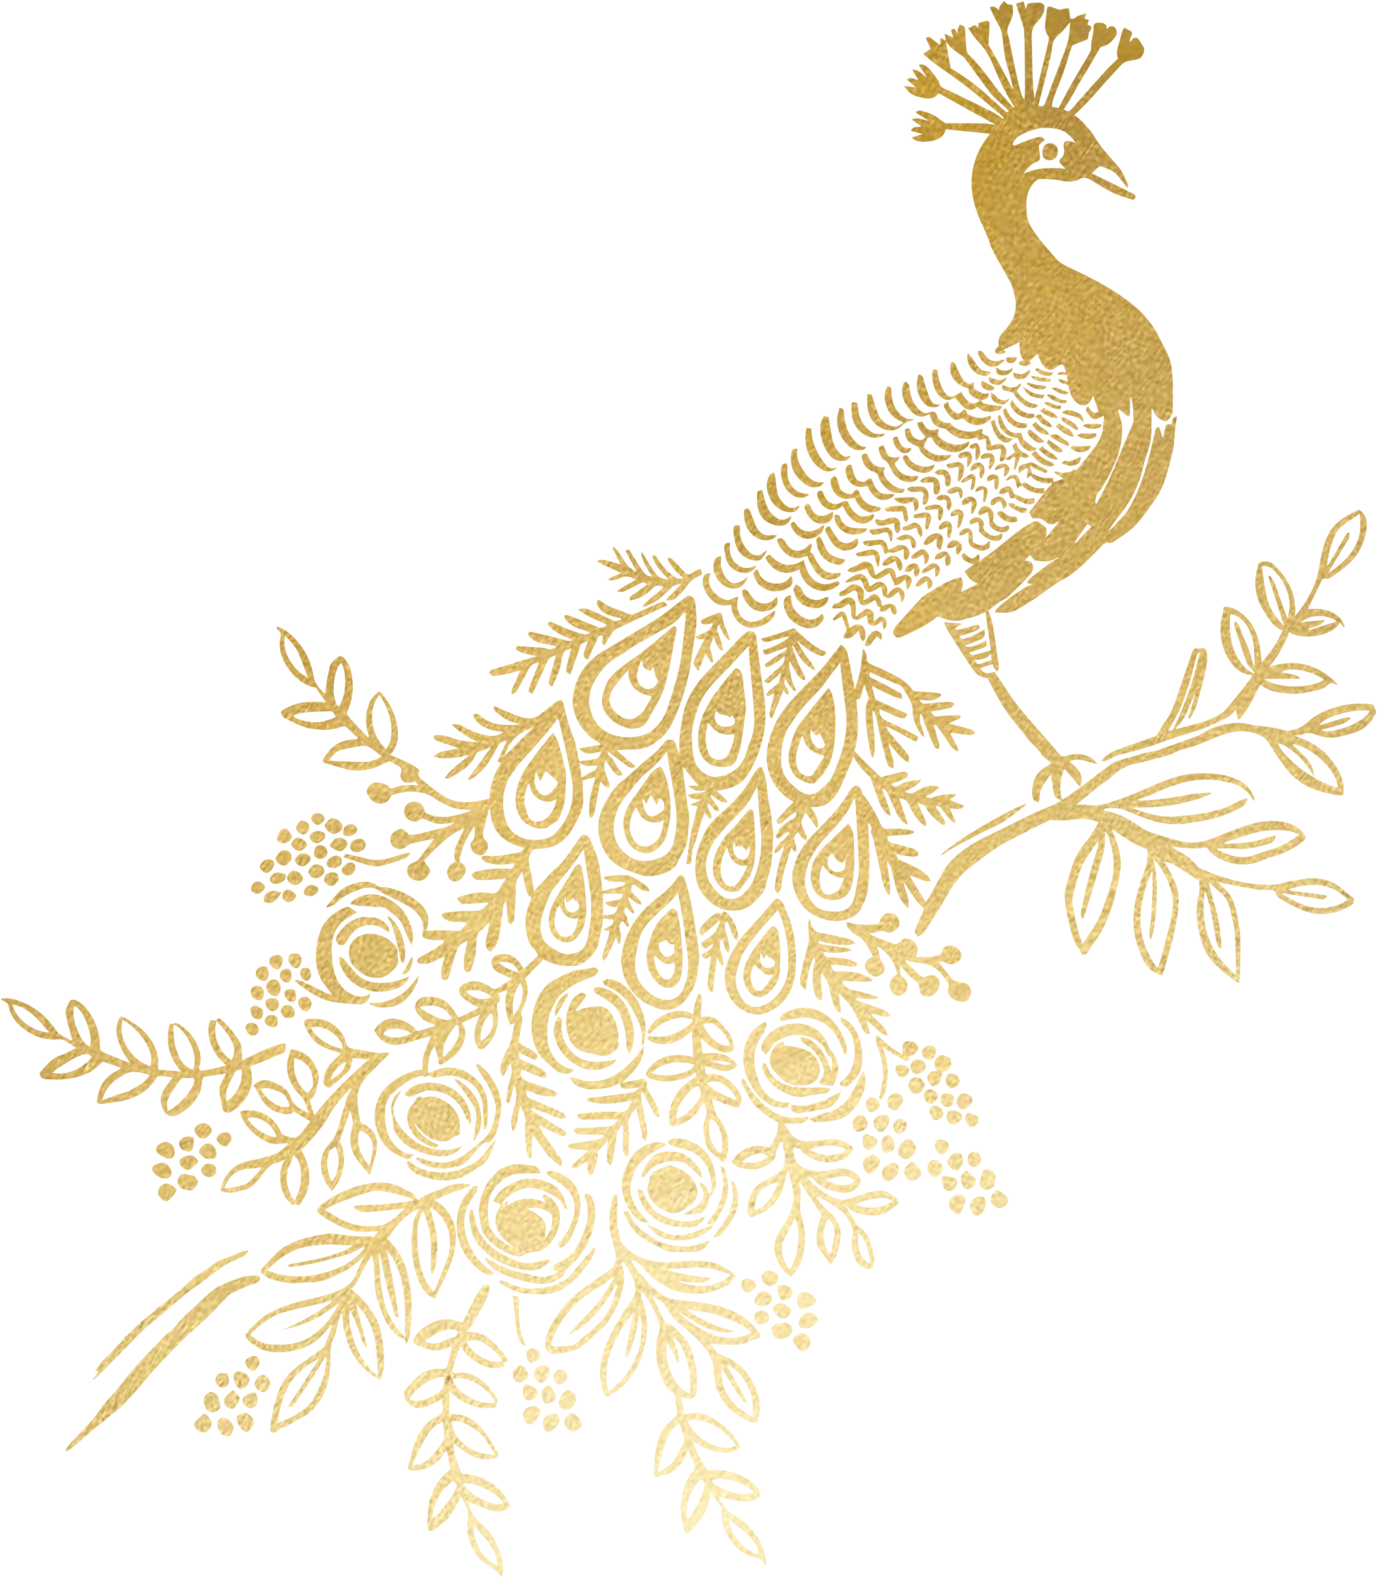 A Gold Peacock On A Branch